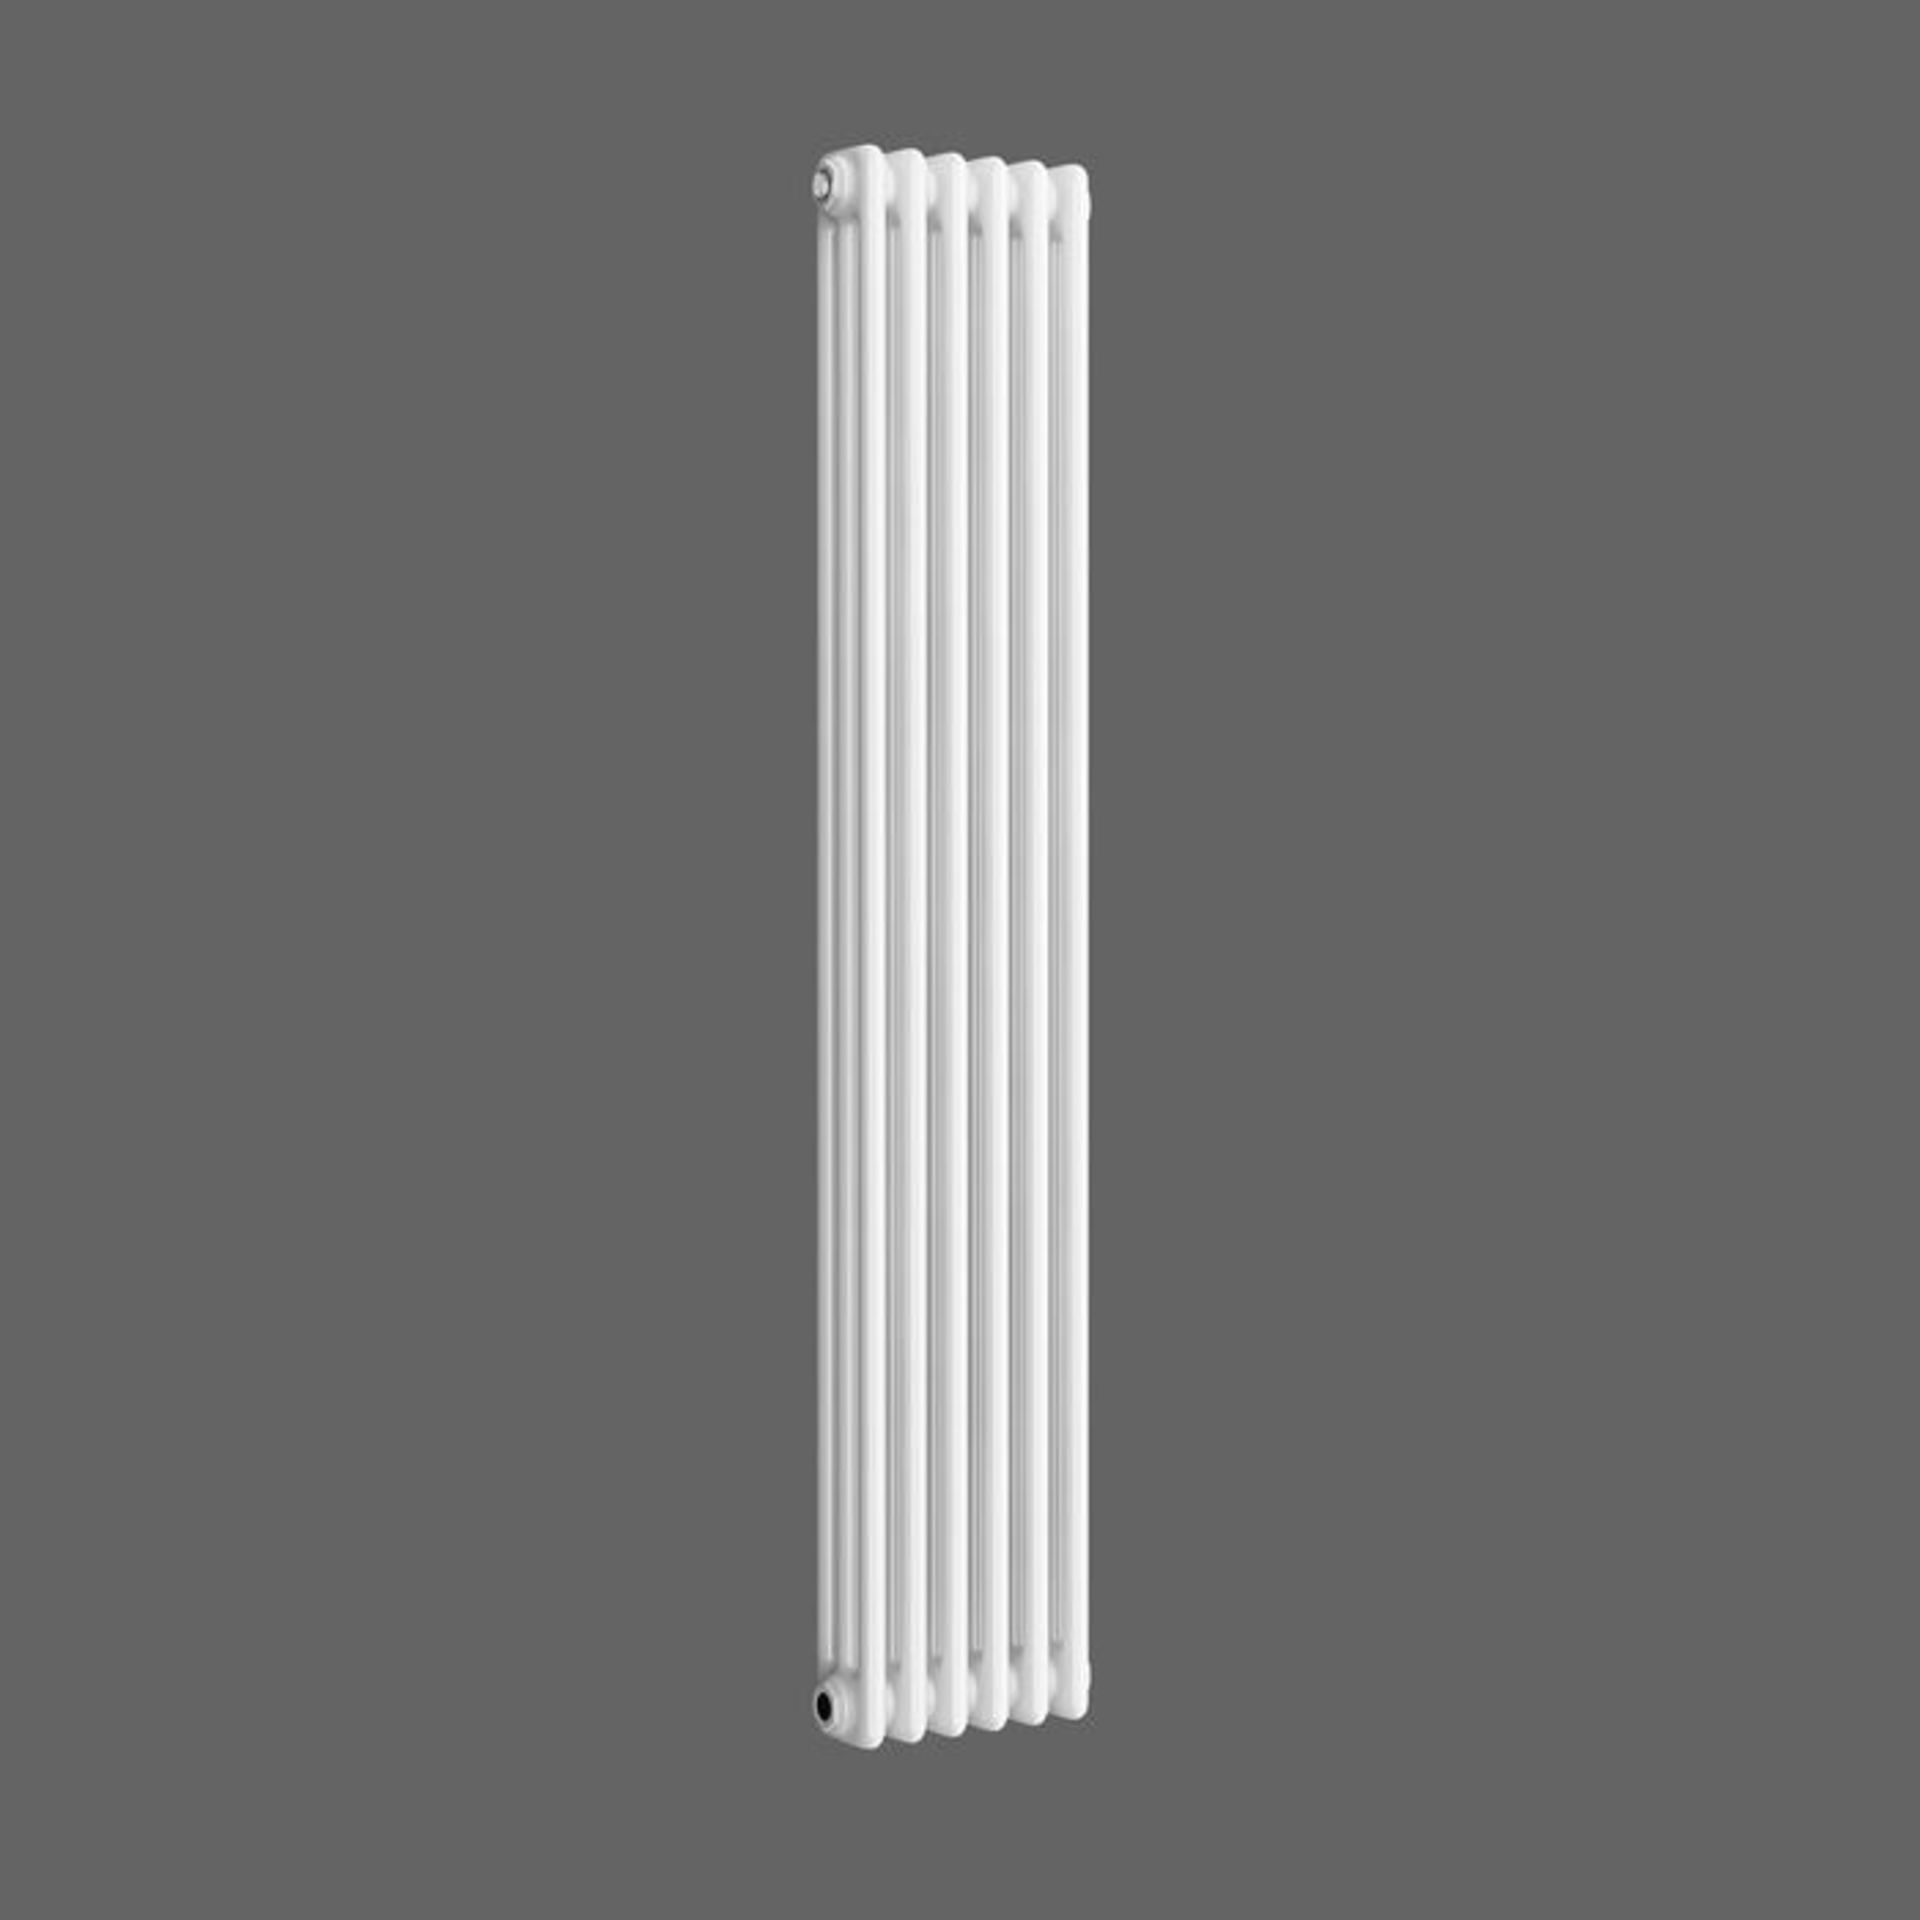 (G147) 1500x380mm White Triple Panel Vertical Colosseum Traditional Radiator. RRP £299.99. Mad... - Image 4 of 4